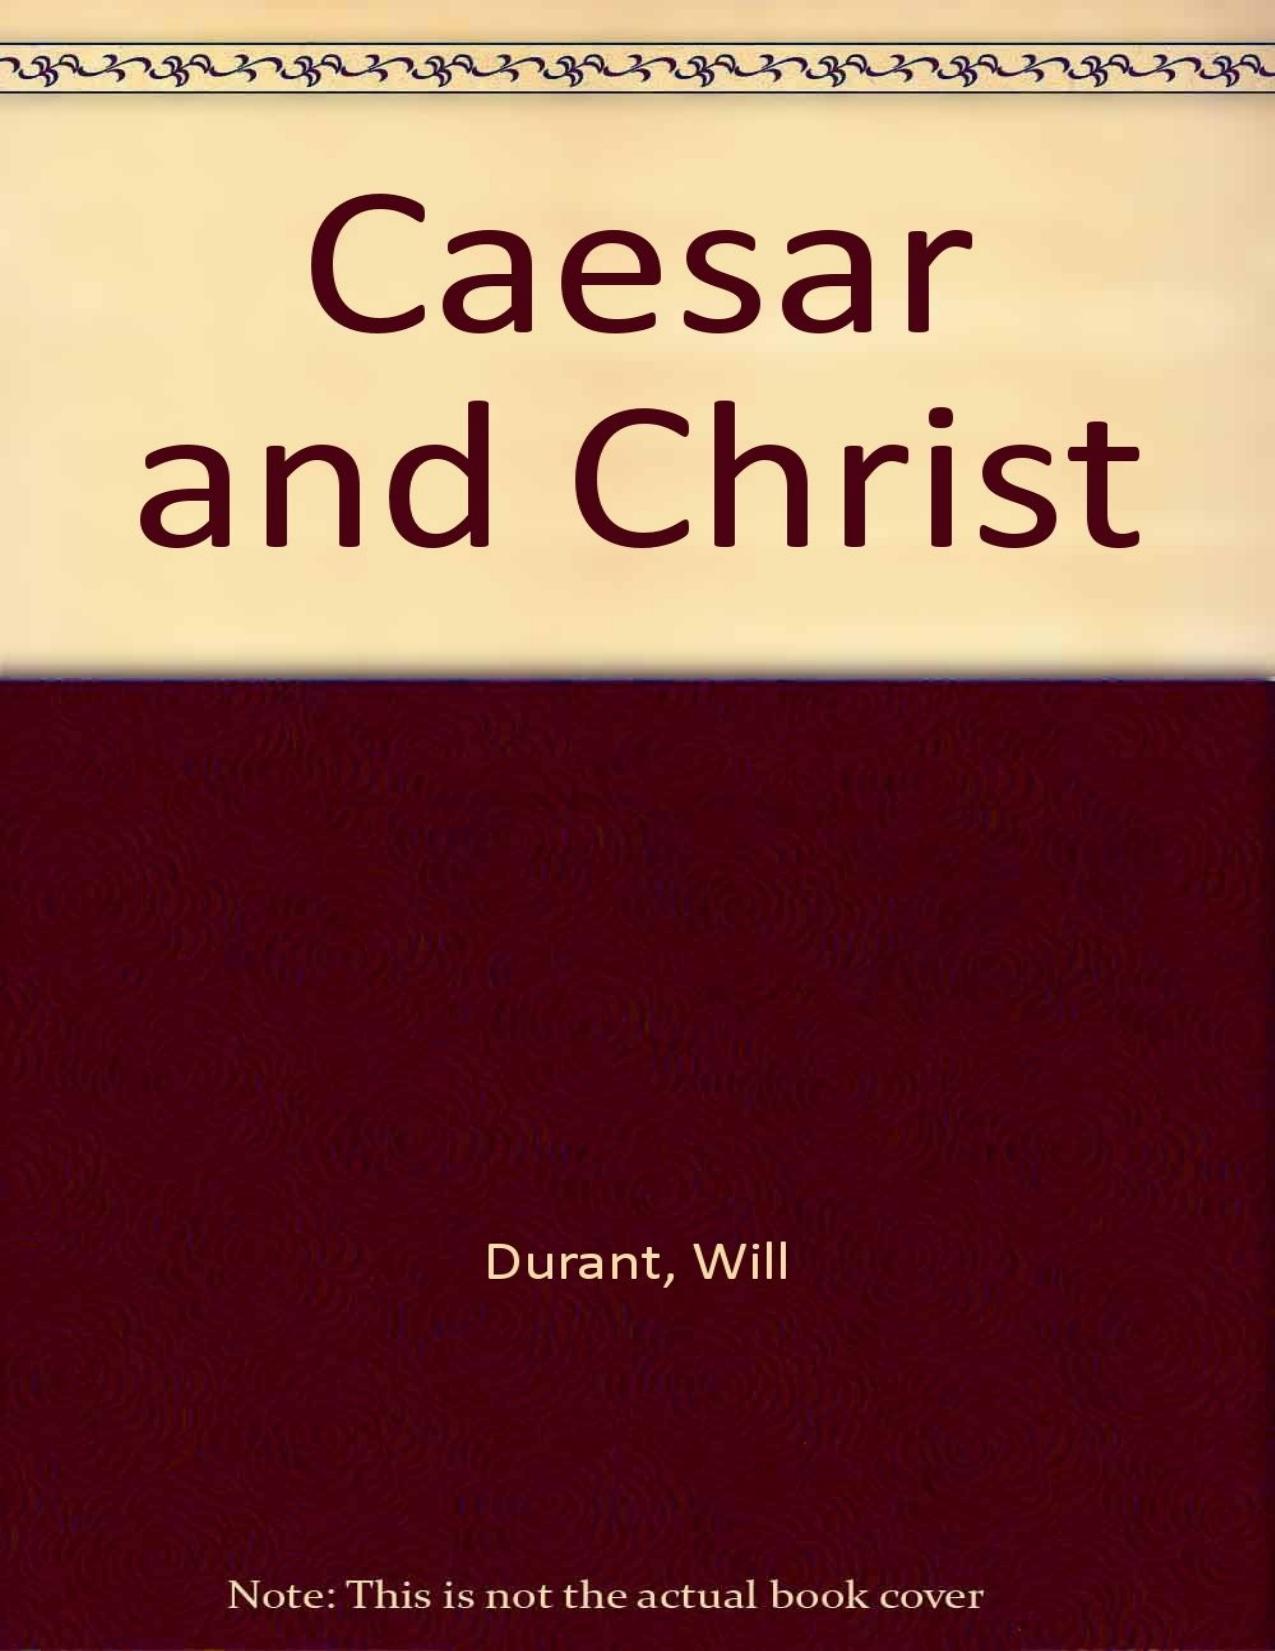 Caesar and Christ: The Story of Civilization by Will Durant